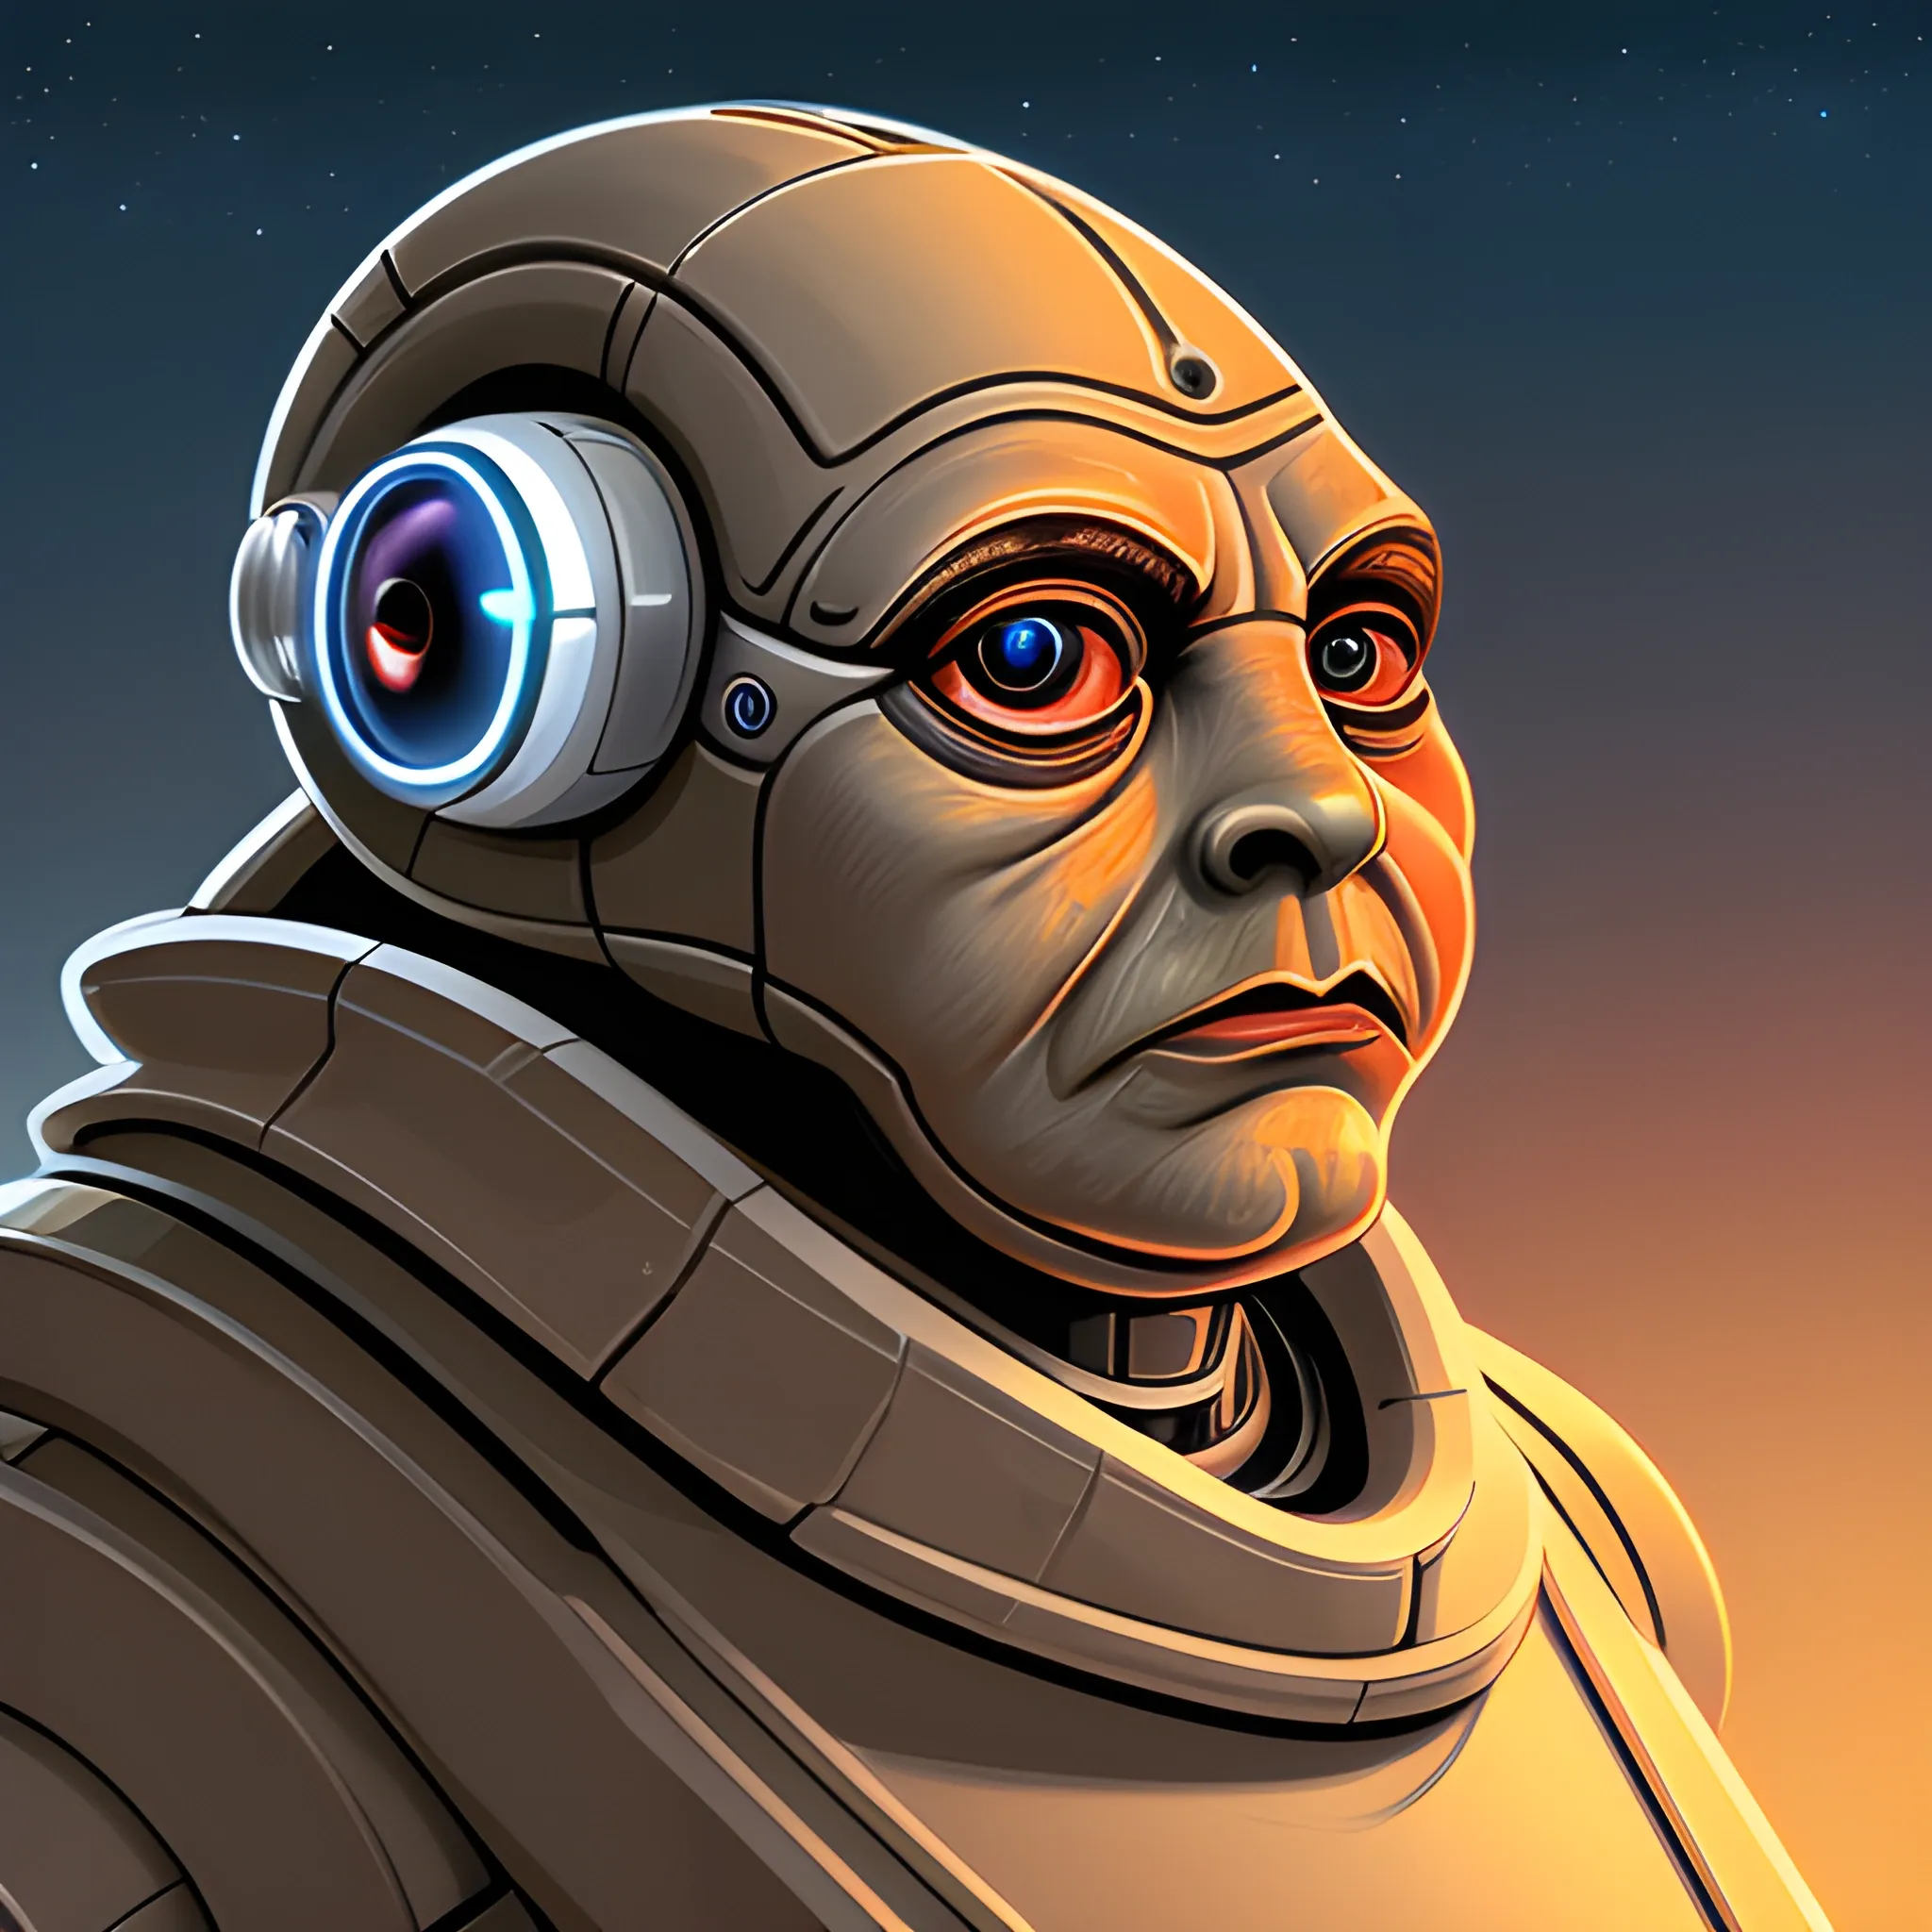 hutt with a robotic eye